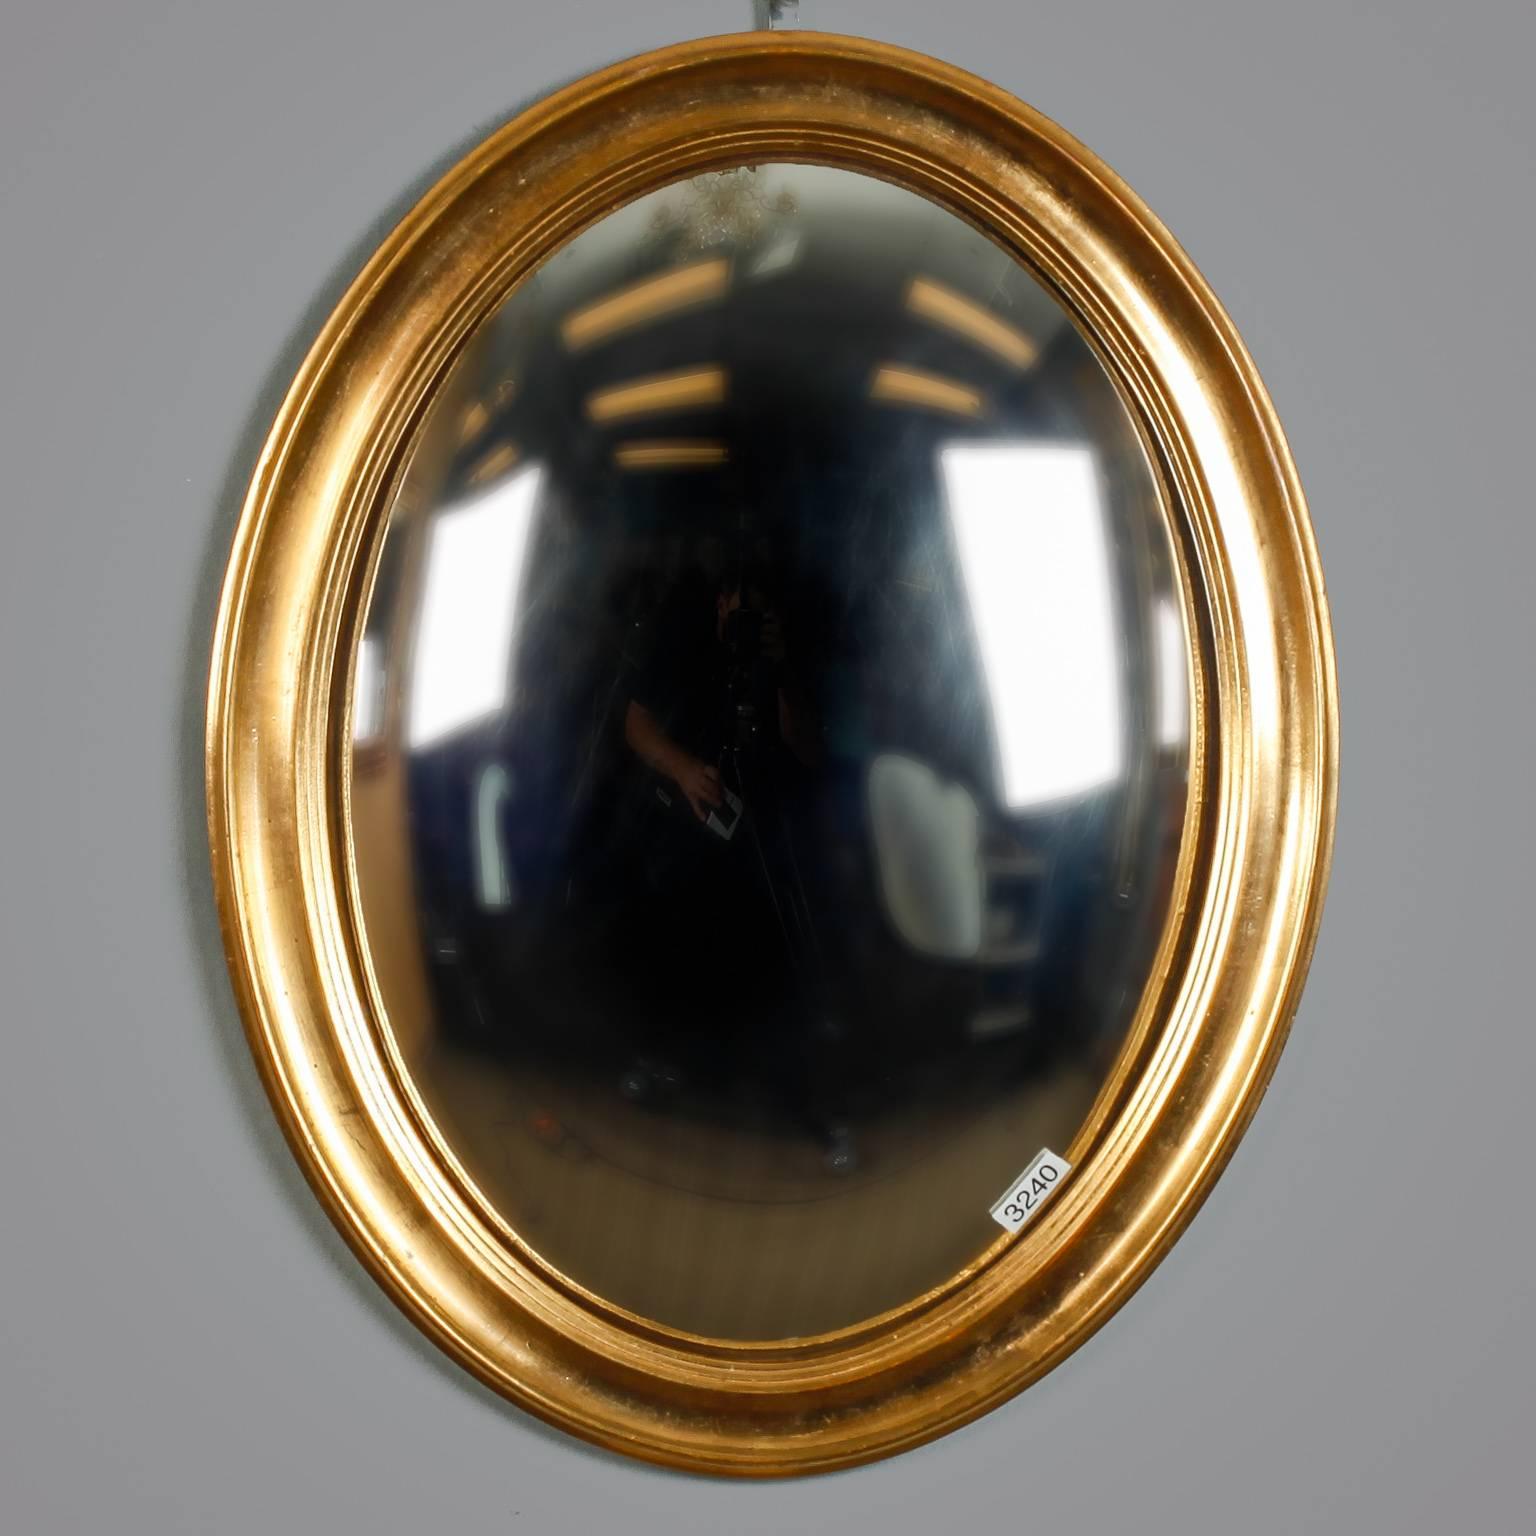 Late19th century butler’s mirror found in England features an oval wood frame with gilded finish and convex mirror. 